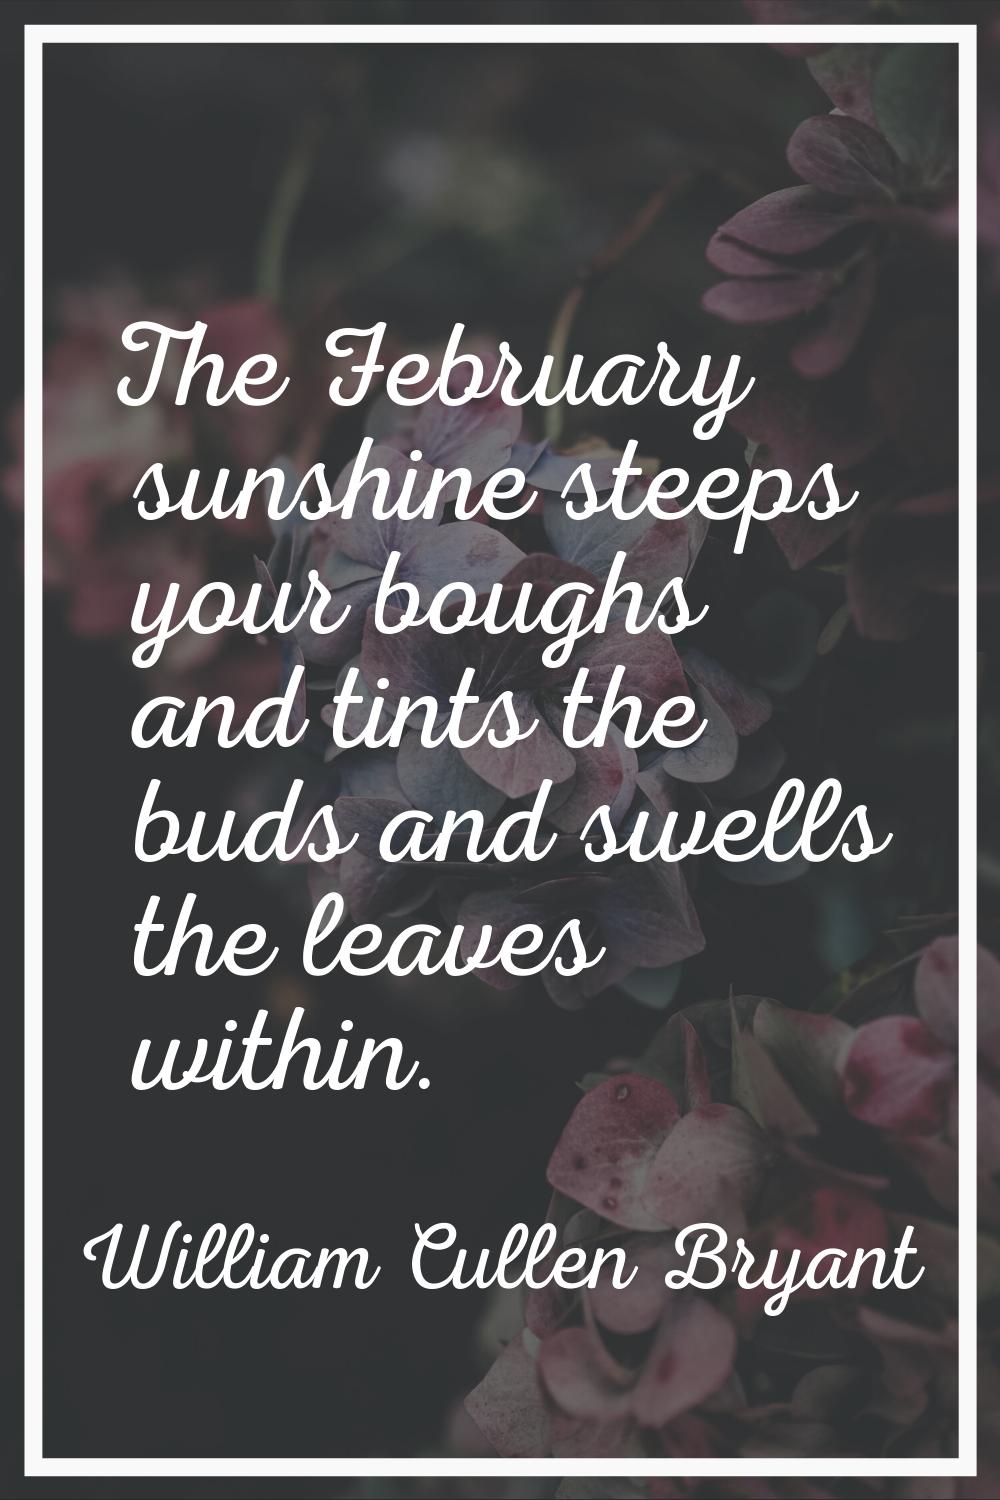 The February sunshine steeps your boughs and tints the buds and swells the leaves within.